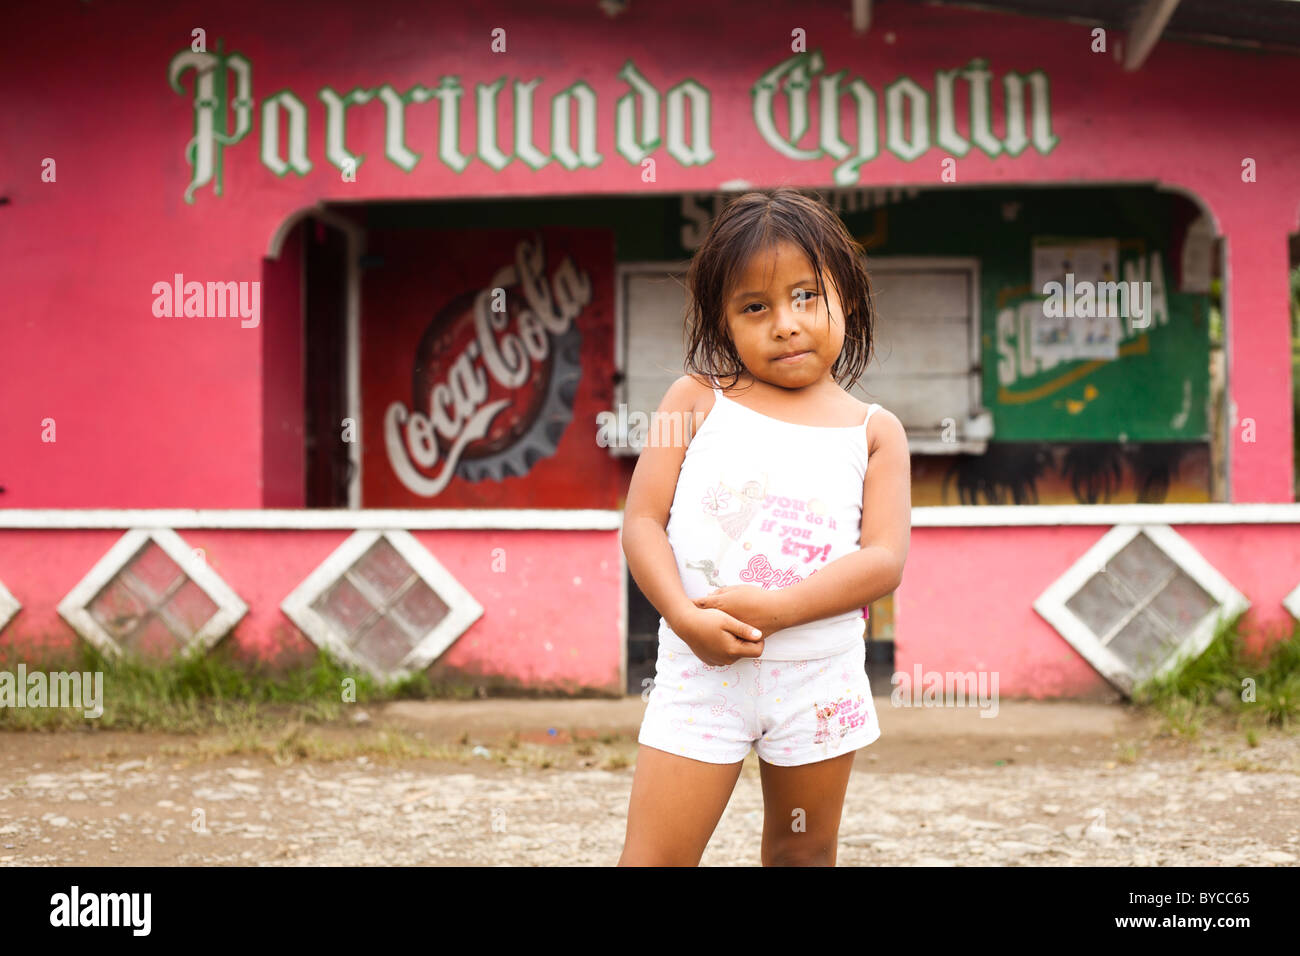 Young girl in white clothes standing in front of pink shot in Panama with coca cola sign Stock Photo